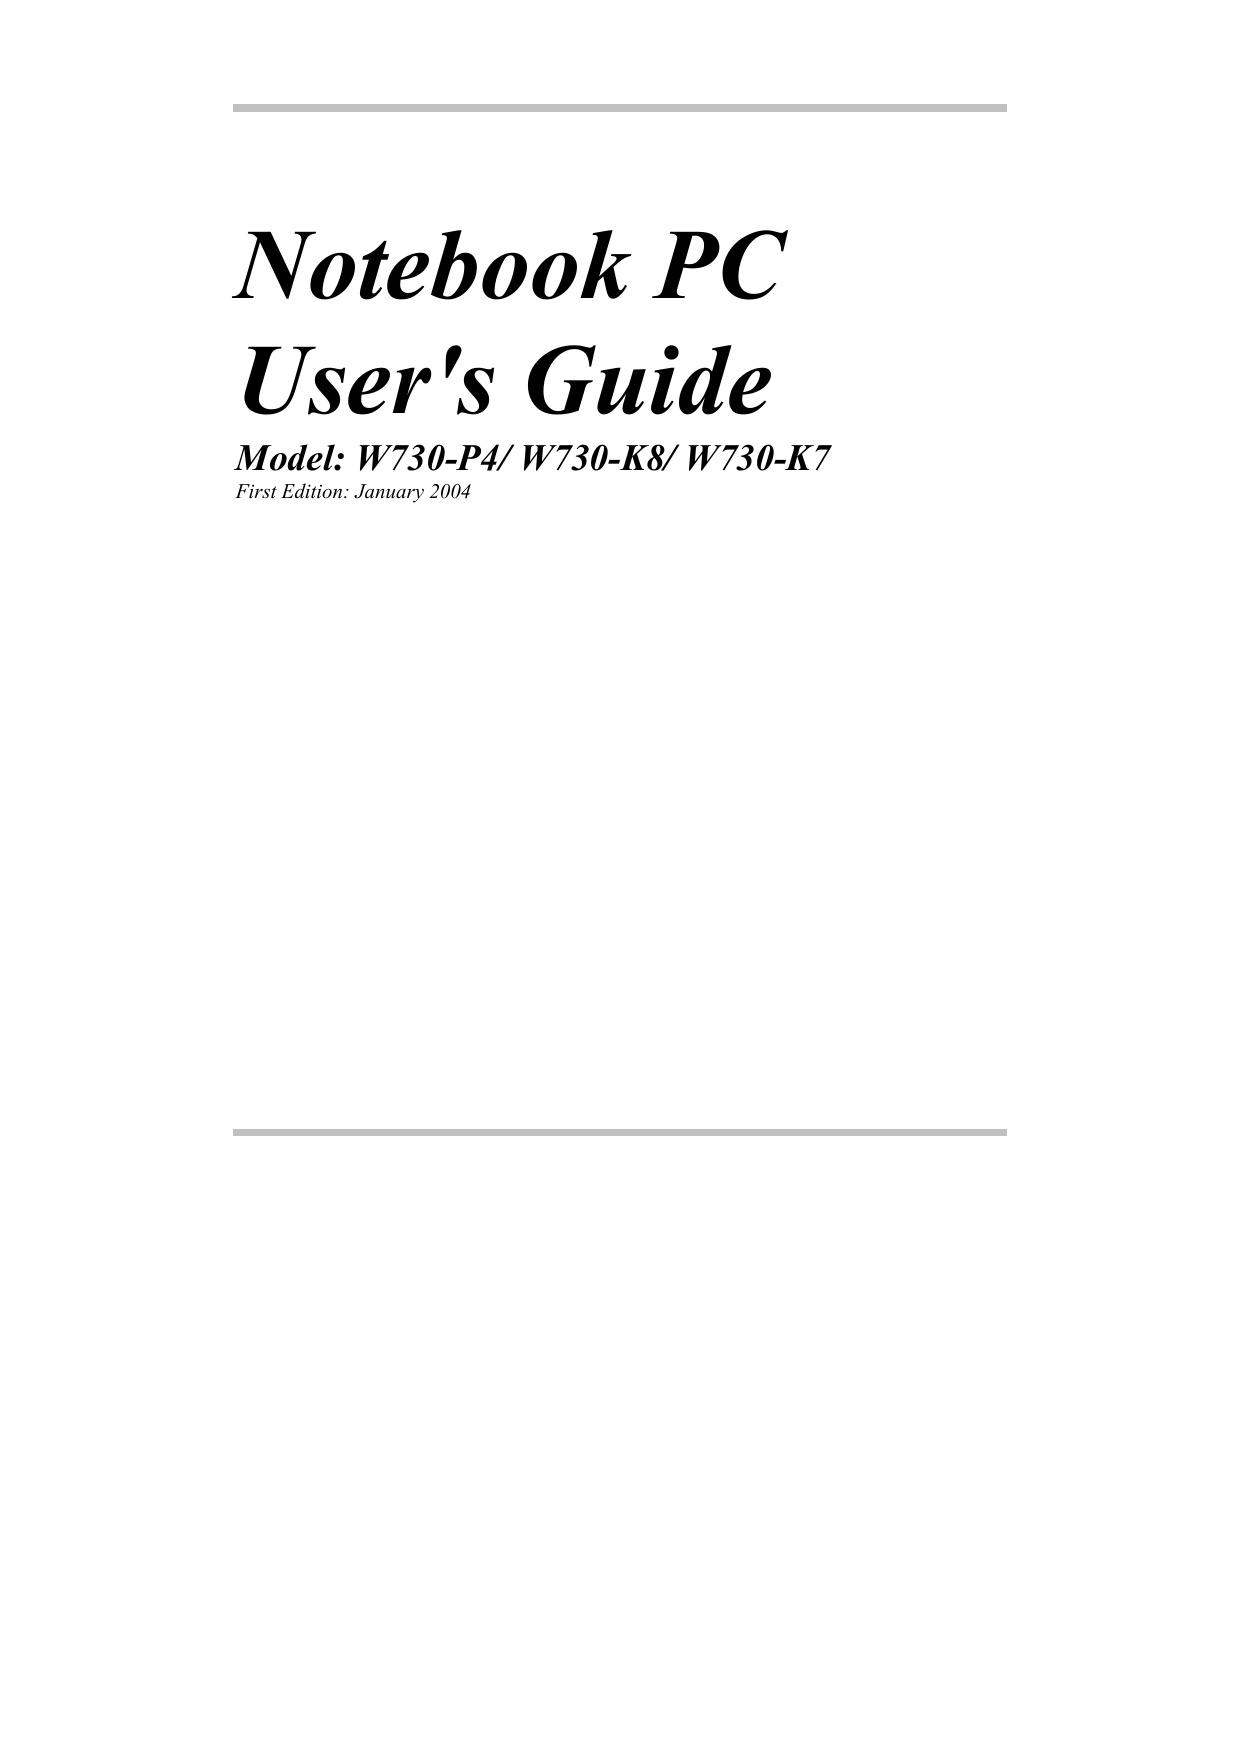                Notebook PC User&apos;s Guide Model: W730-P4/ W730-K8/ W730-K7 First Edition: January 2004  